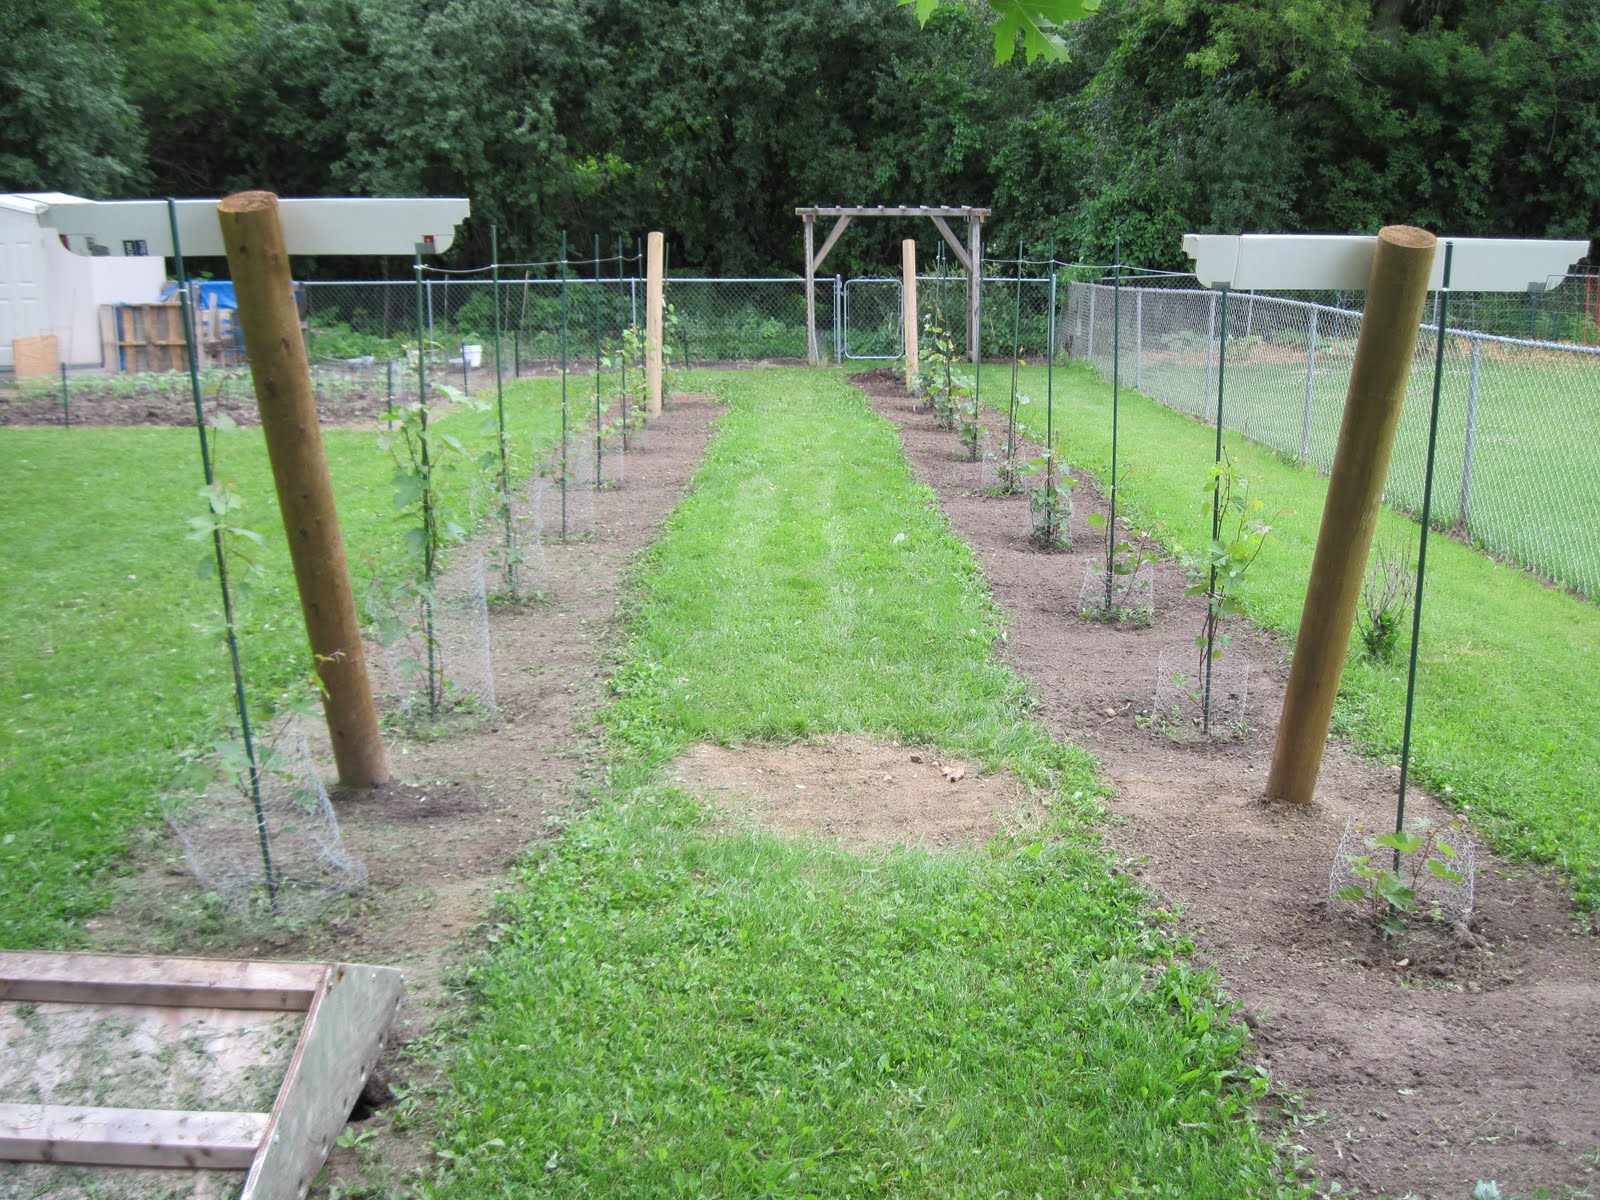 Growing Grapes in my Vineyard: Trellis Construction